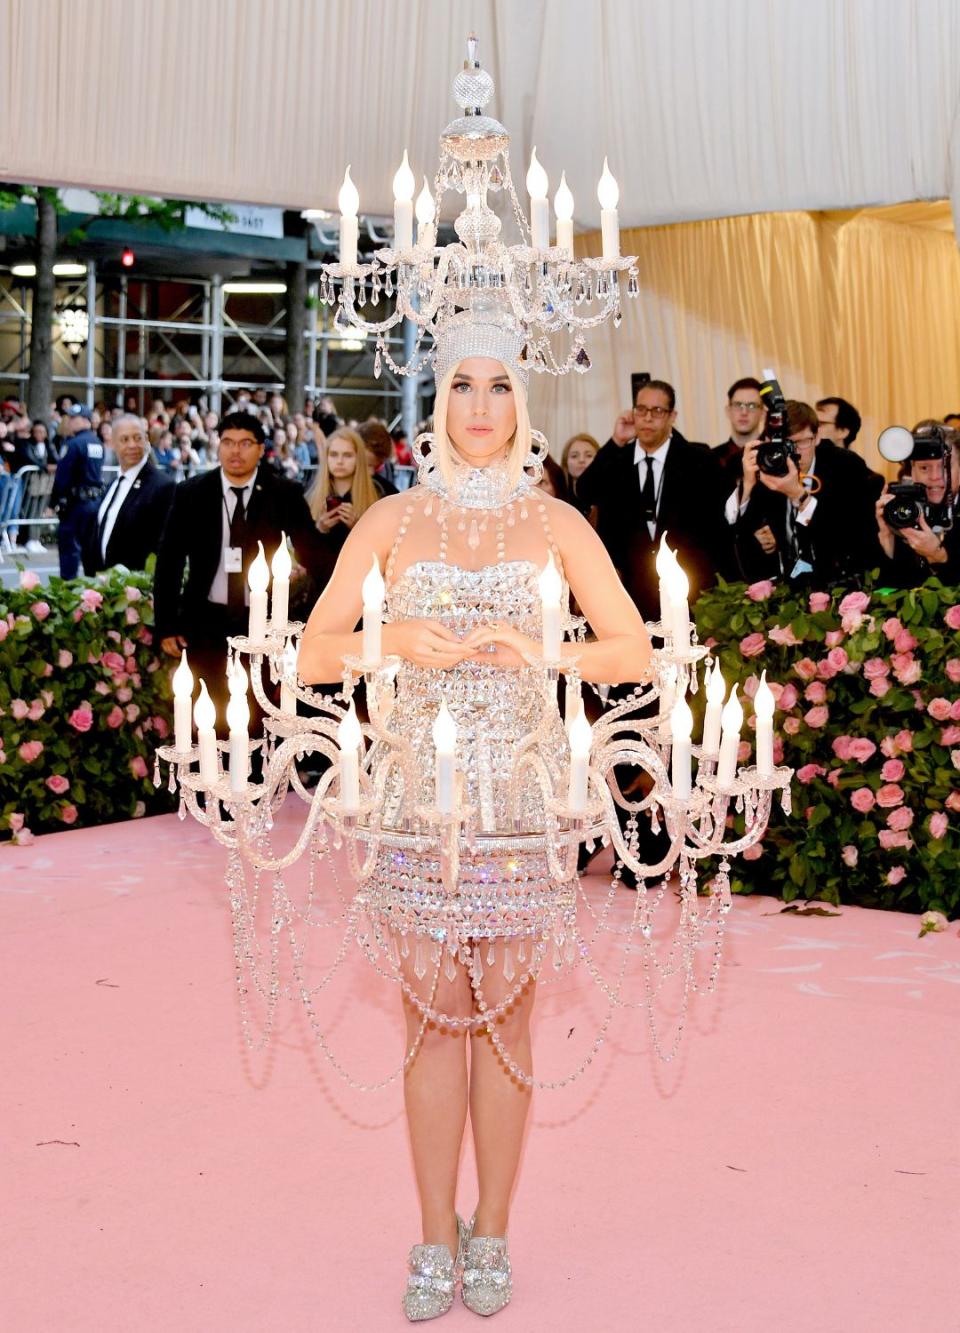 <p> The best Met Gala looks are always surprising as there's no telling how celebs will interpret the theme - and we'll never forget this one from singer Katy Perry. </p> <p> For the 2019 Met Gala, where the theme was Camp: Notes on Fashion, Perry wore a mesmerising chandelier gown that had three tiers of working lights. The iconic dress was designed by Jeremy Scott who created the dress along with his team and hand-placed thousands of Swarovski crystals on the gown. </p>